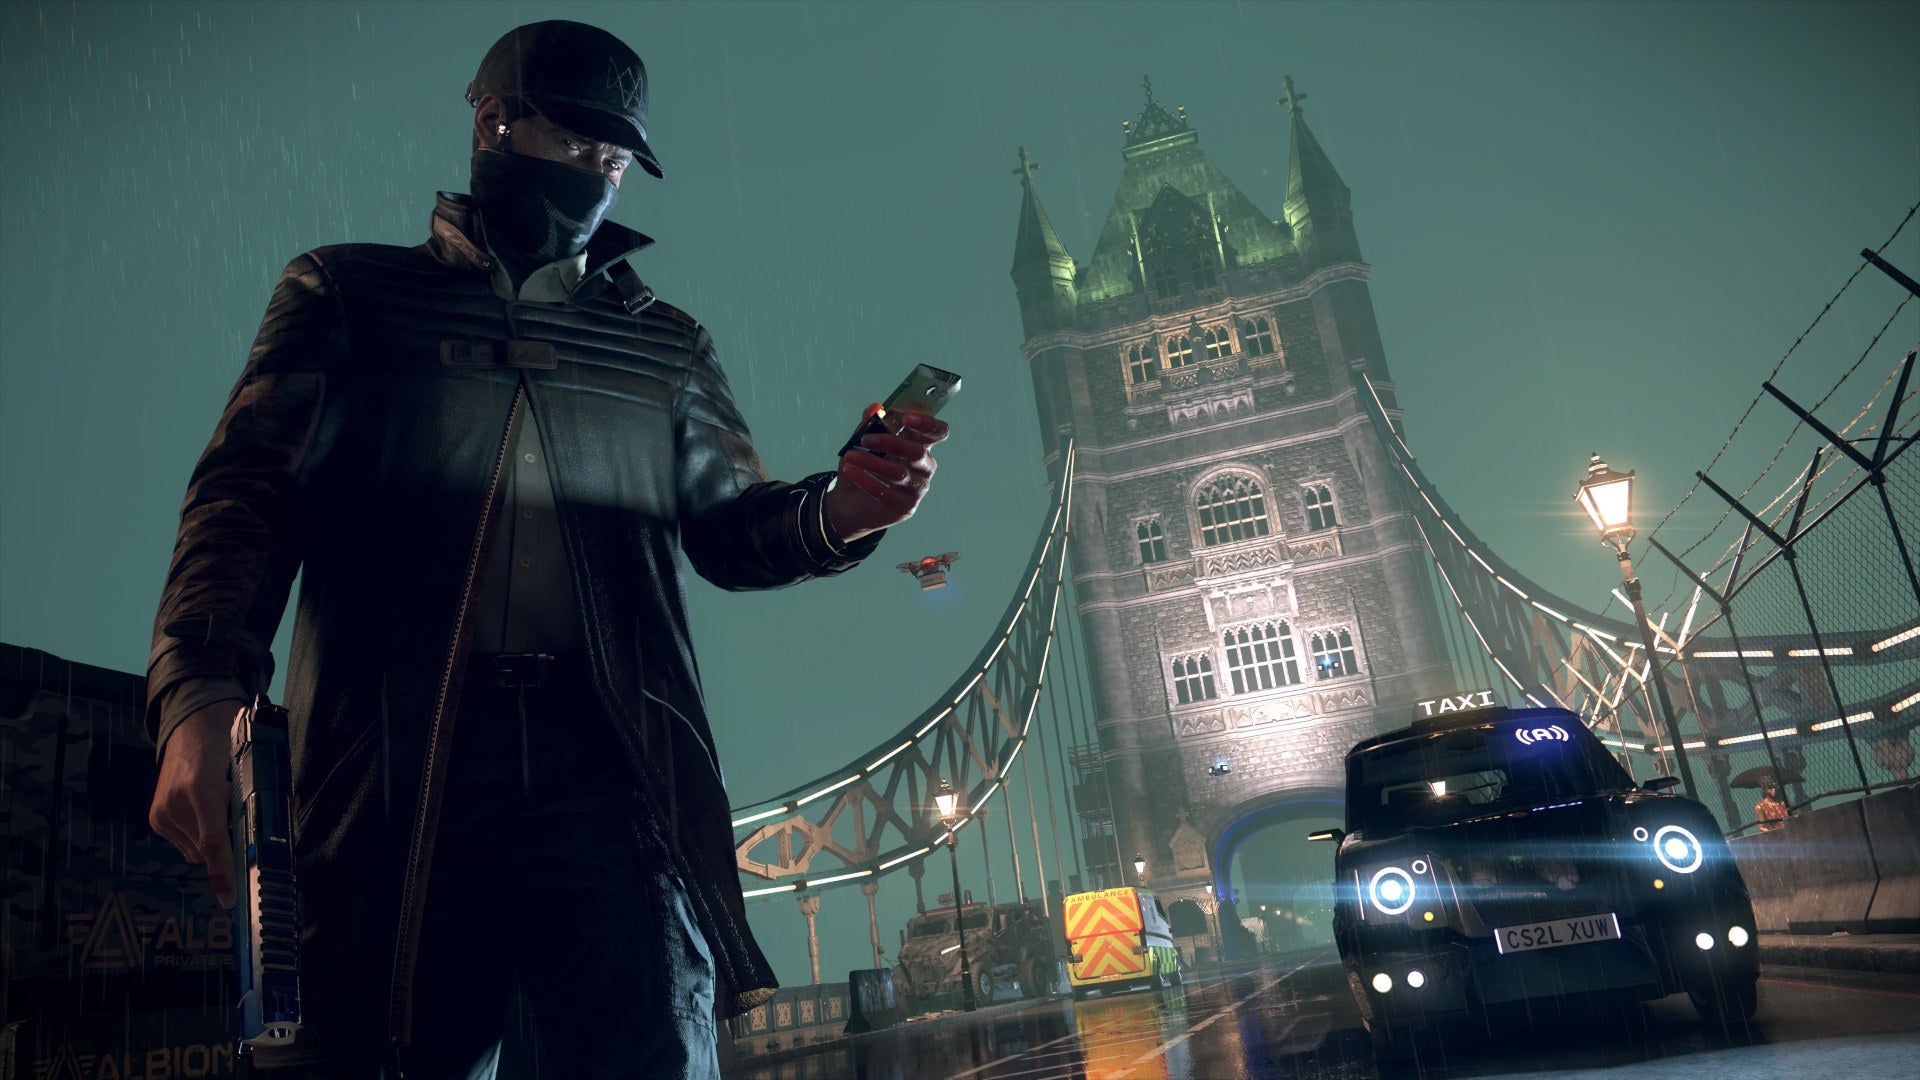 Amazon.com: Watch Dogs - PlayStation 4 : Ubisoft: Video Games